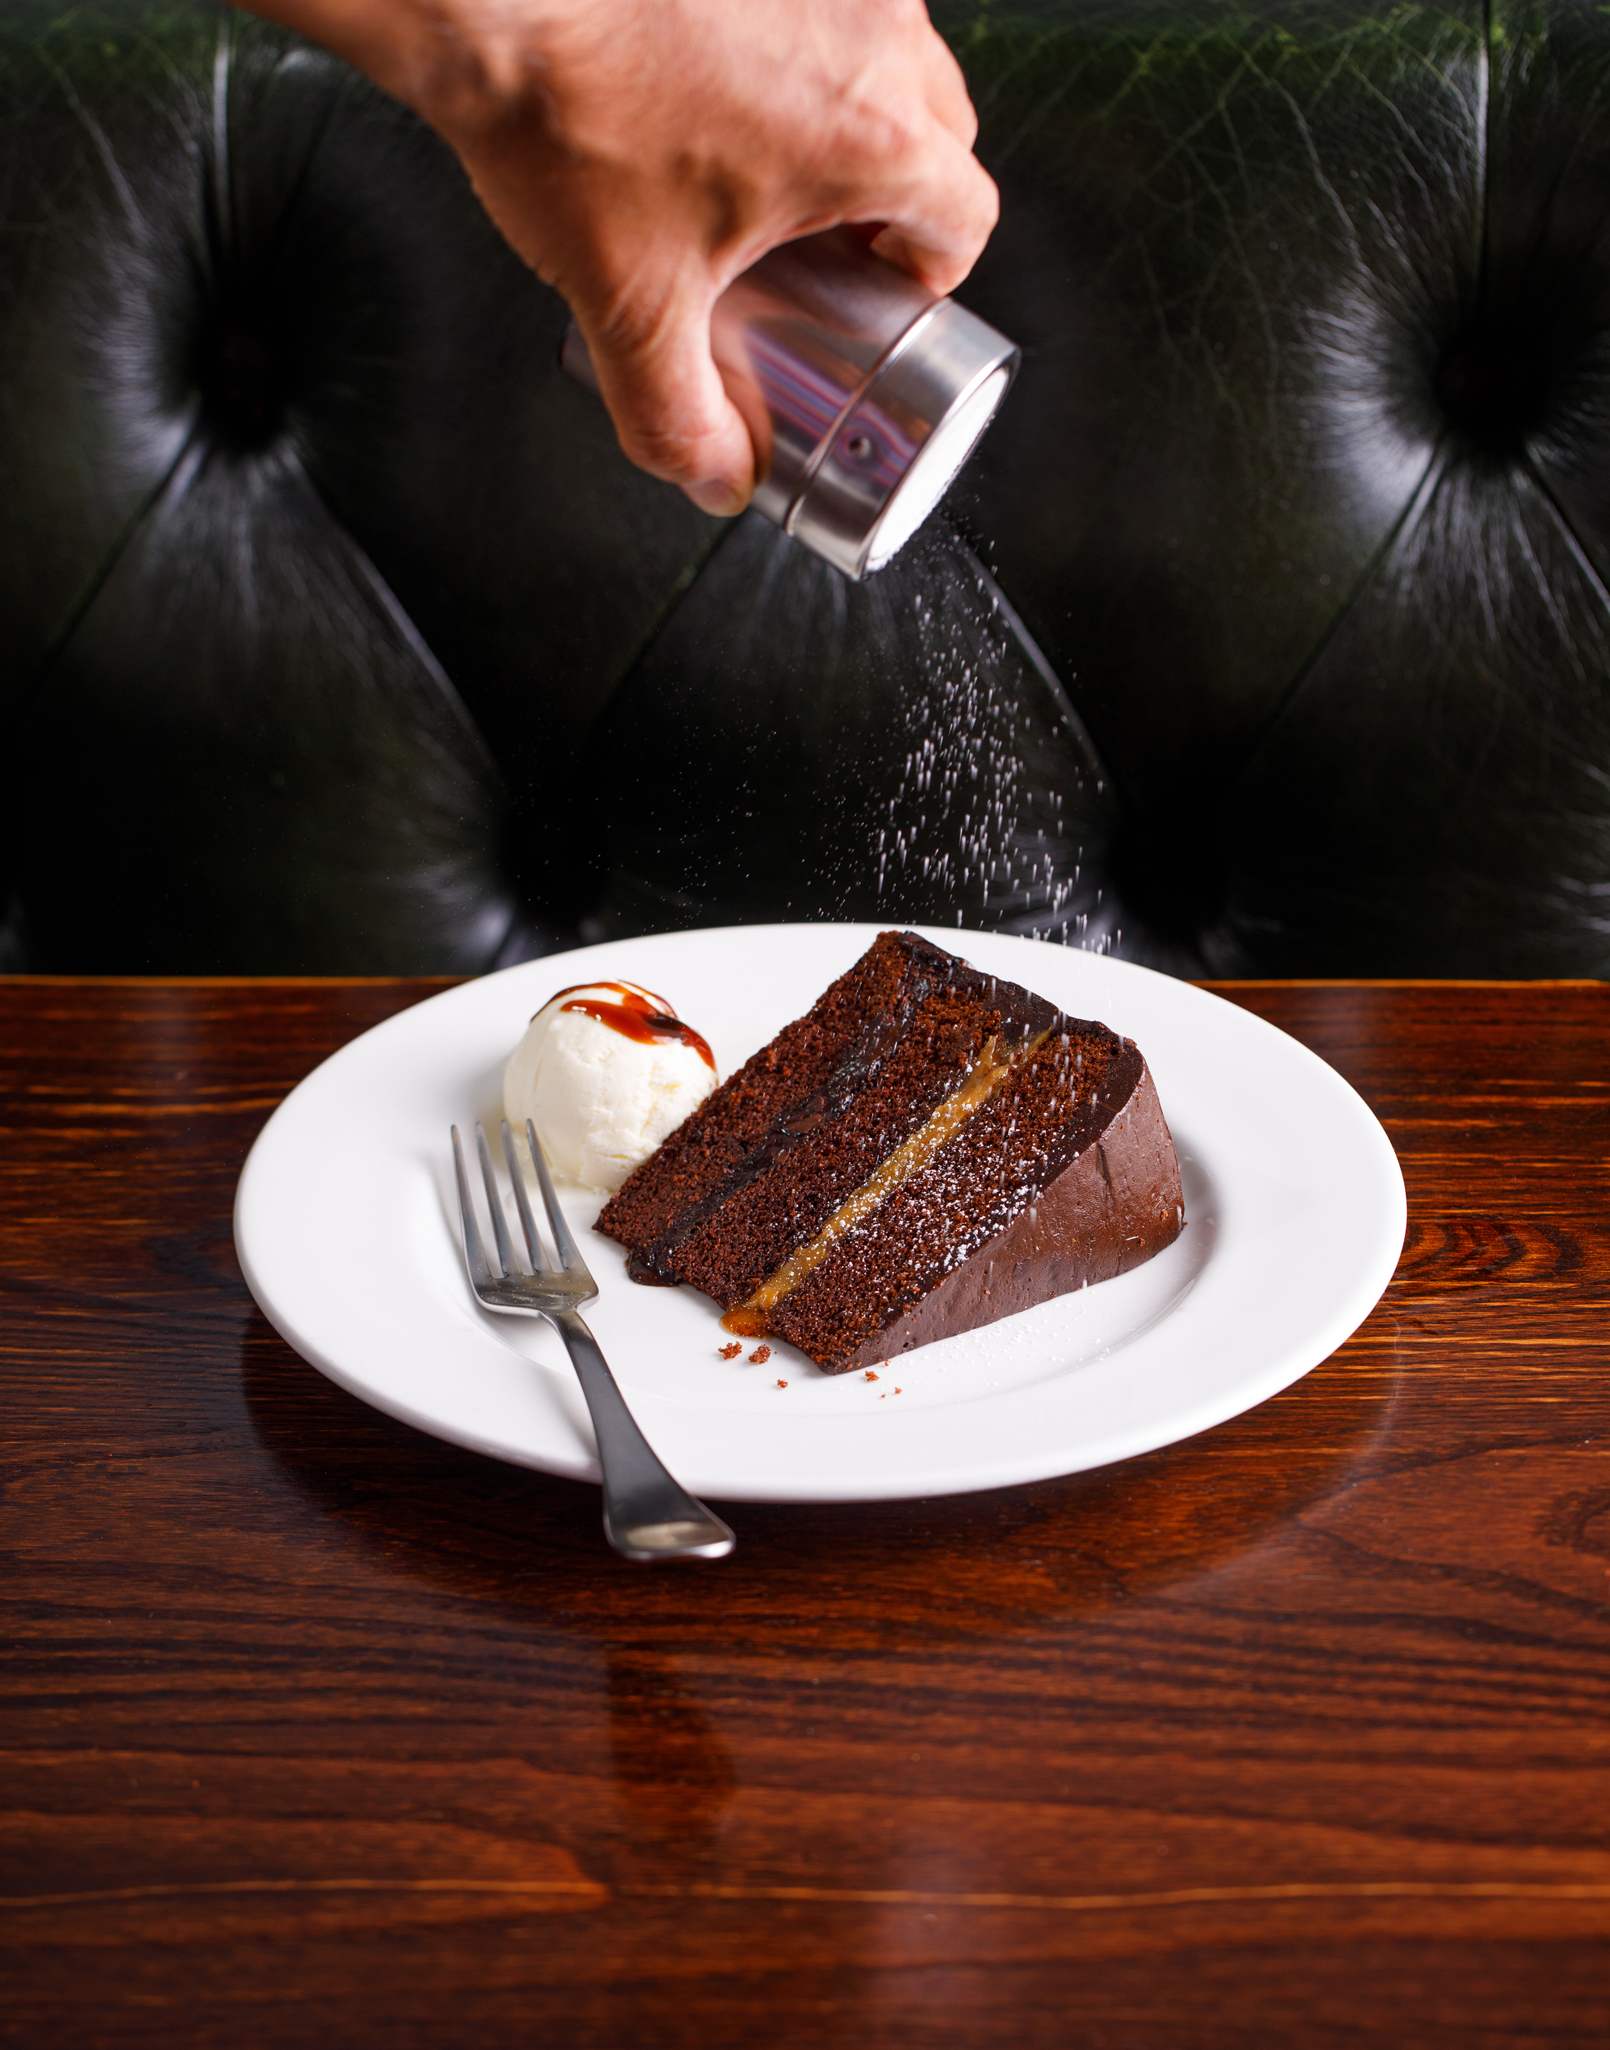 photo of a piece of chocolate cake being dusted with icing sugar from above